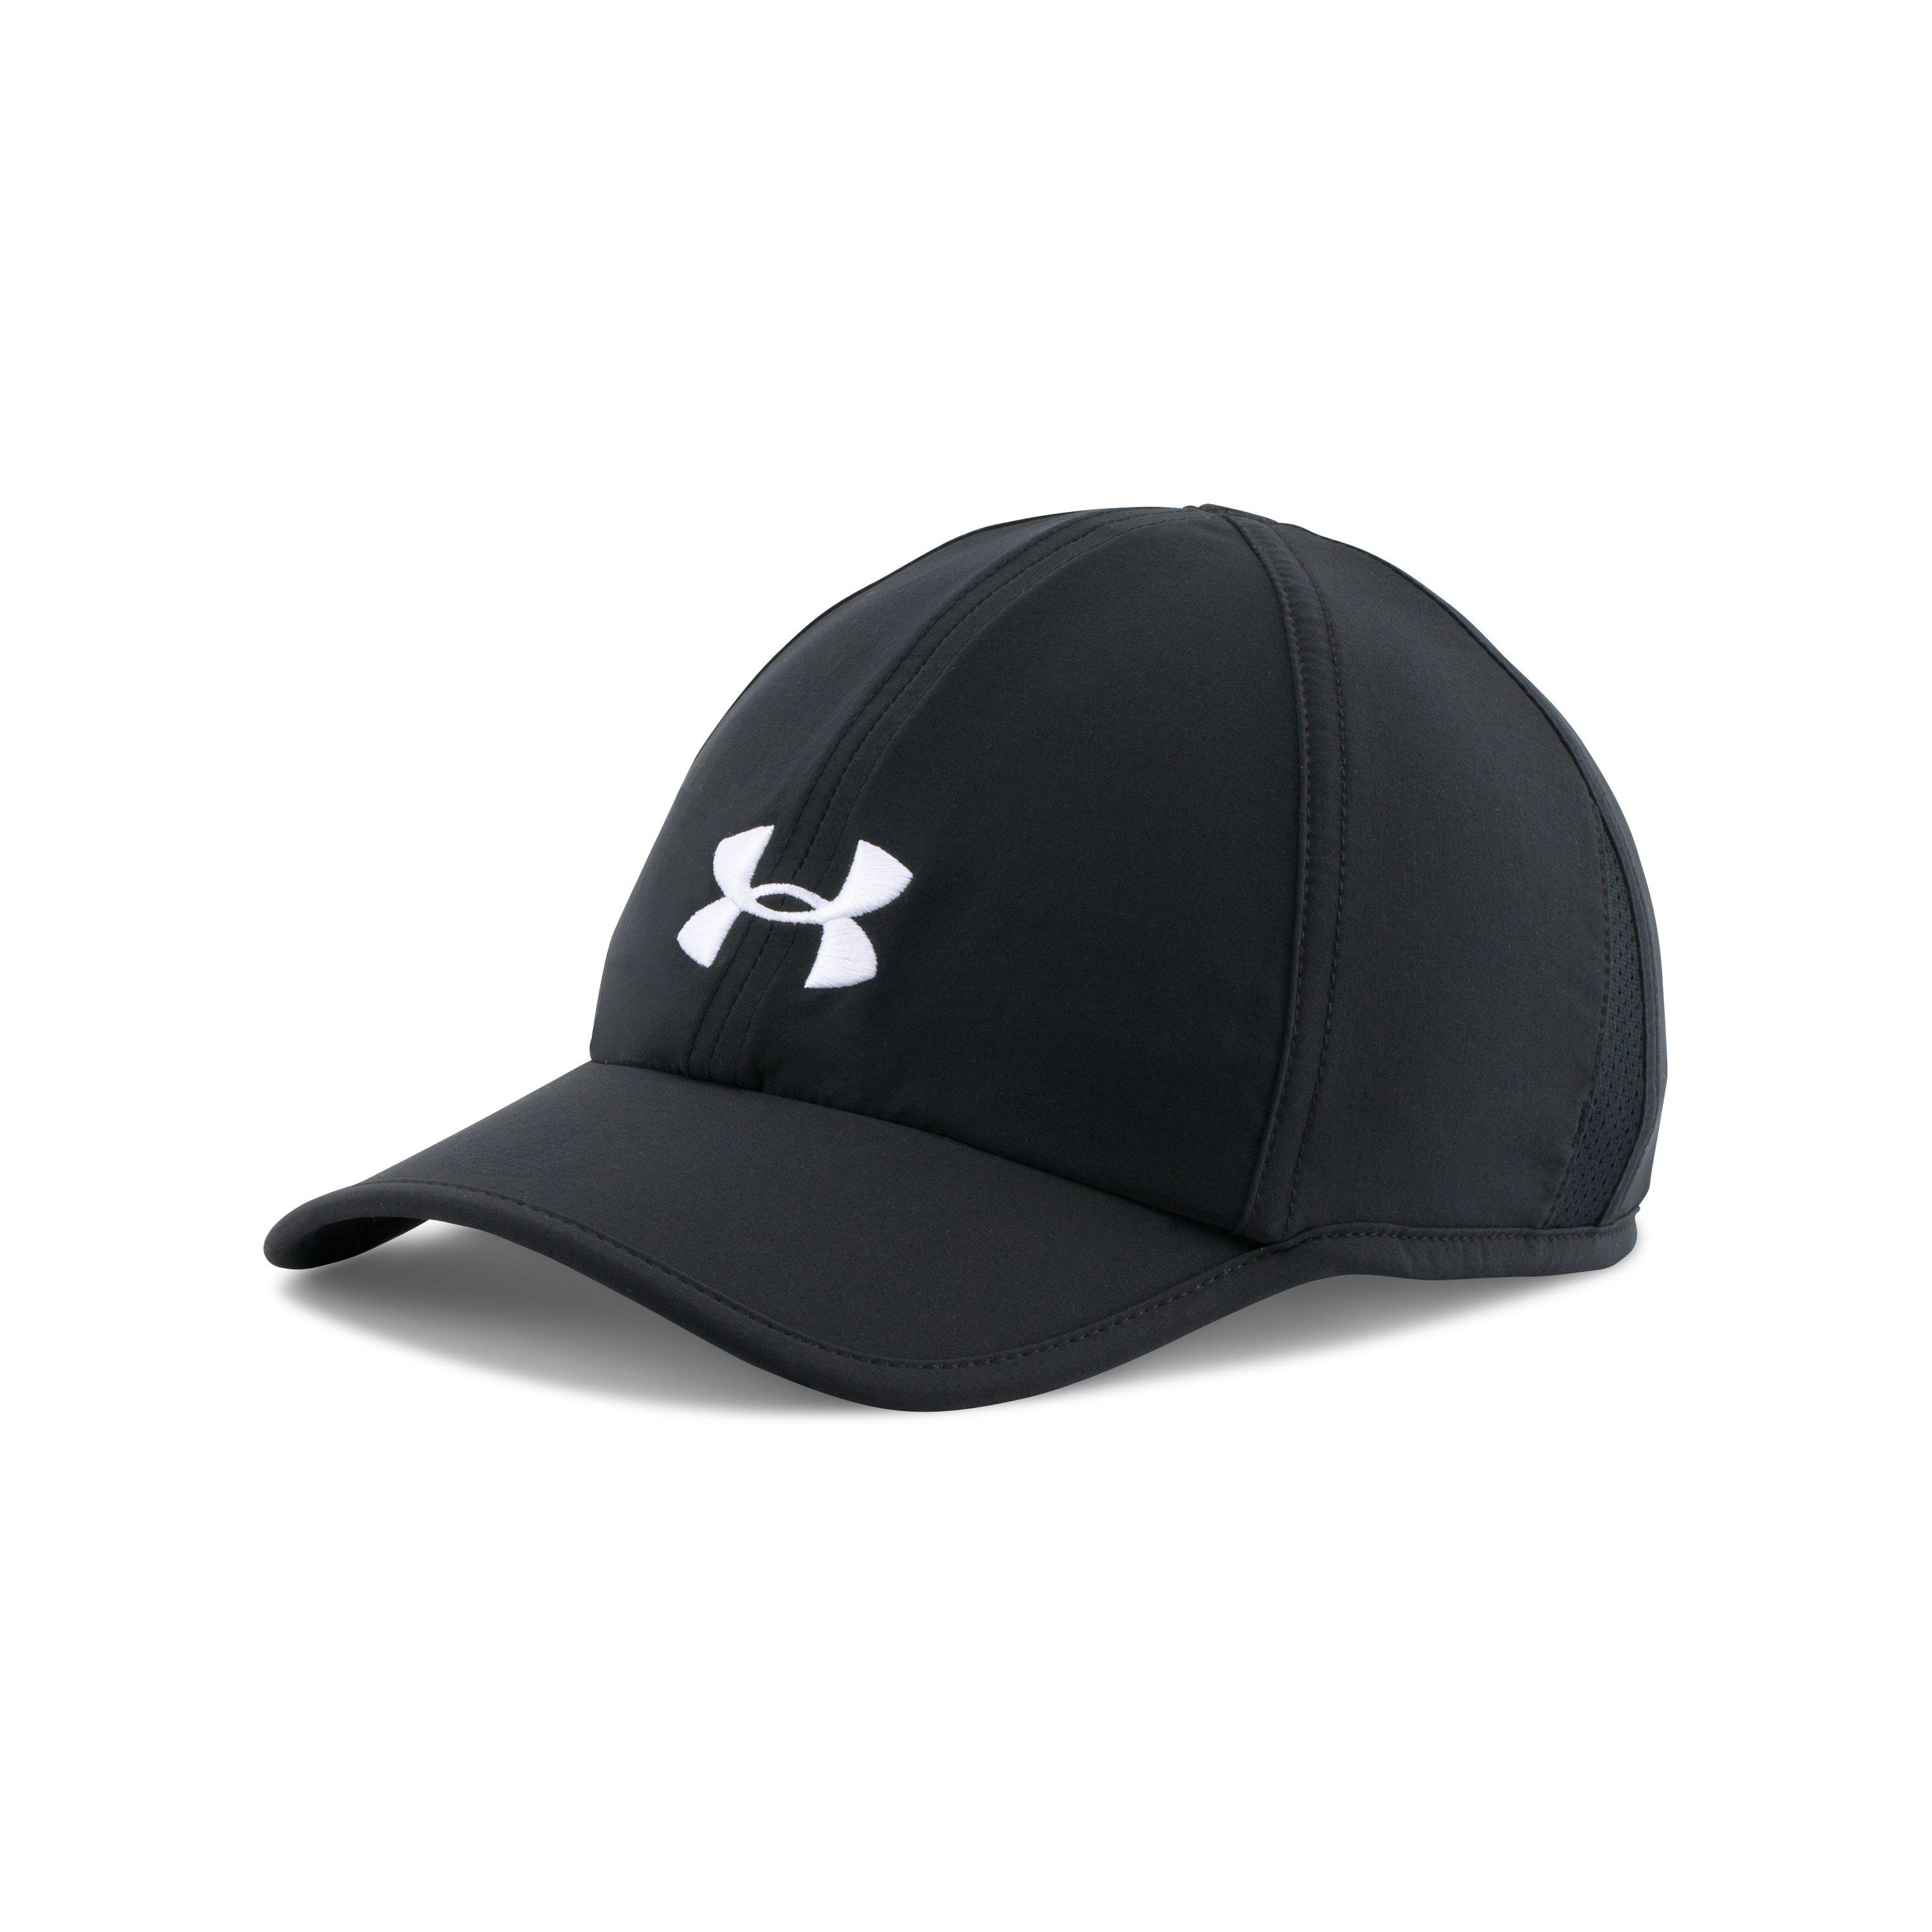 Under Armour Synthetic Women's Ua Shadow 2.0 Cap in Black /Black (Black)  for Men - Lyst